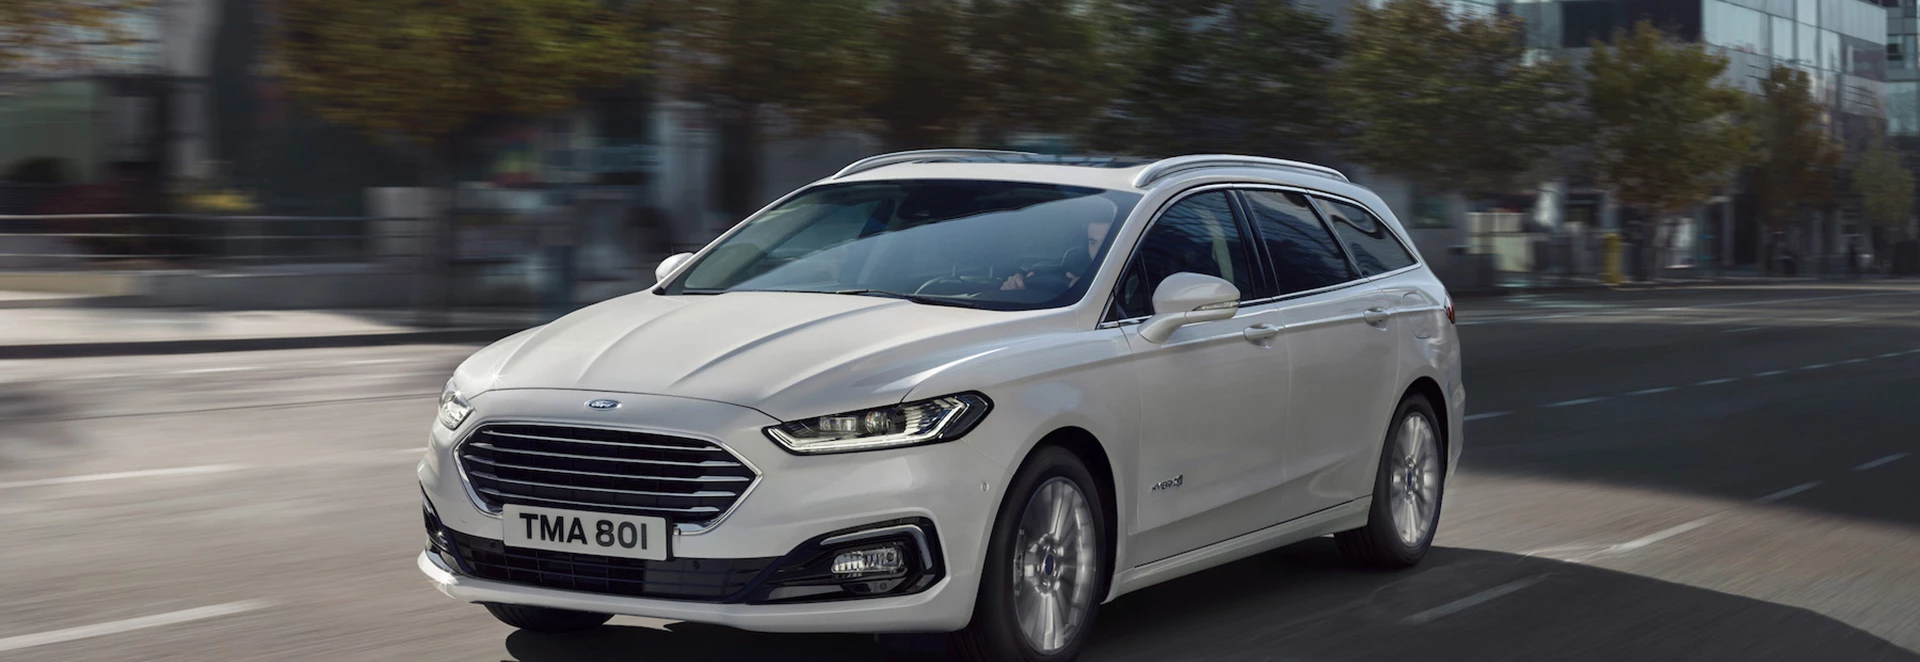 Ford Mondeo Hybrid prices reduced as part of range changes